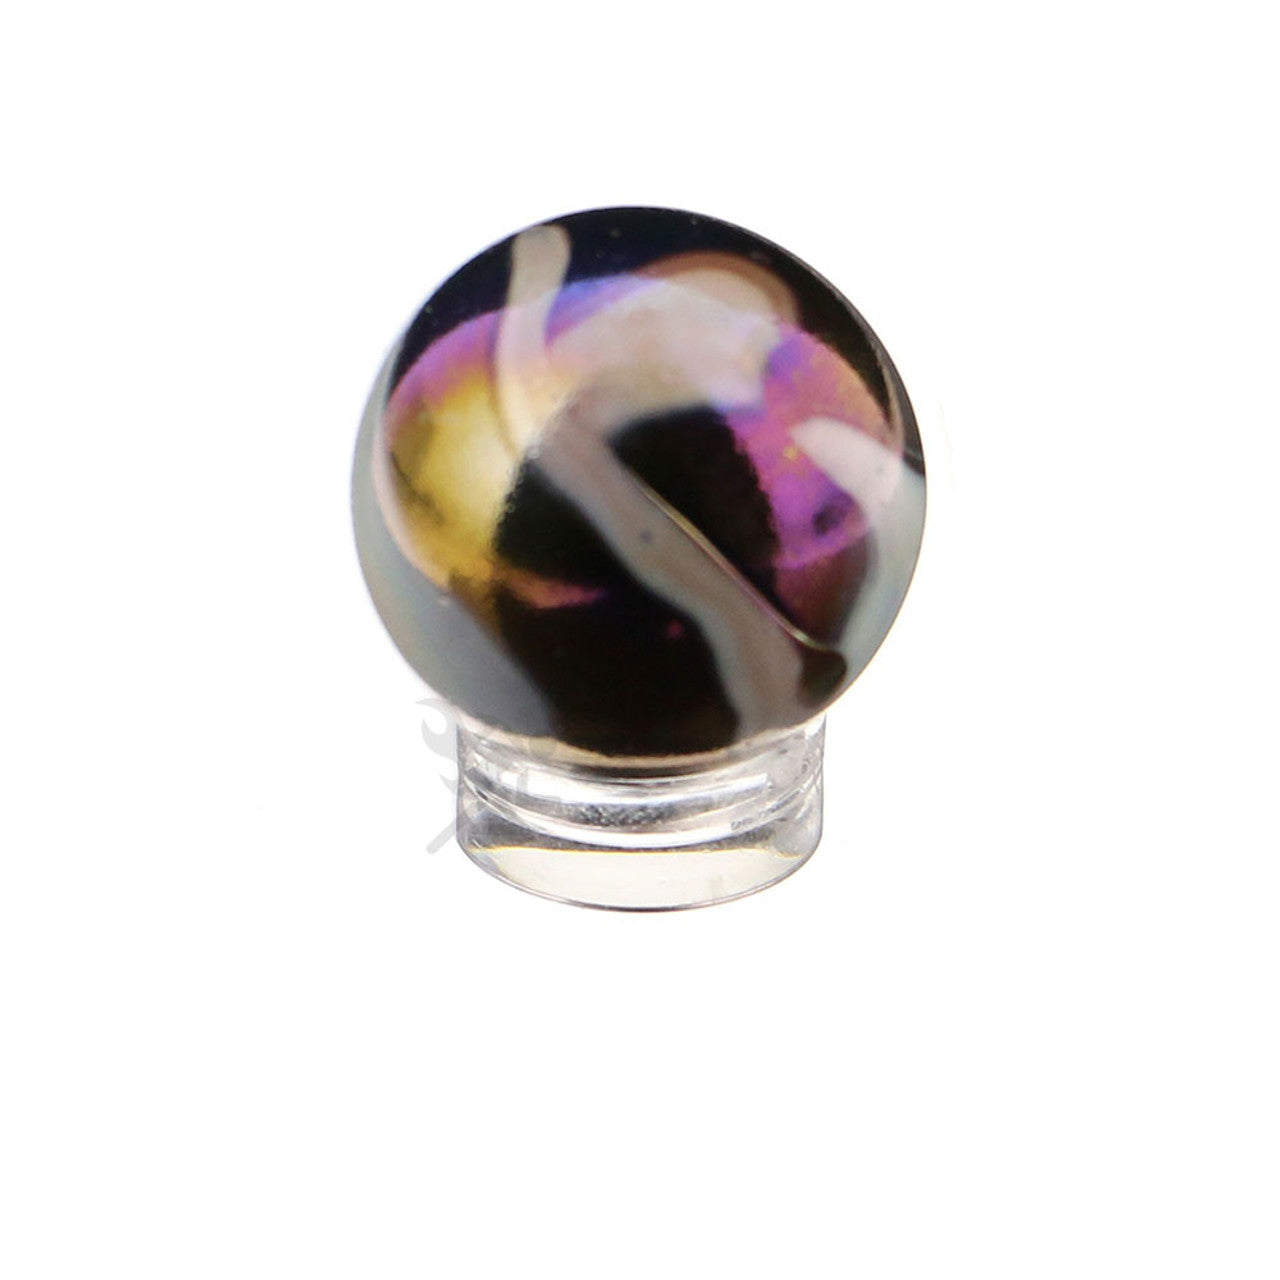 5/8" x 1/4" Acrylic Beveled Ring Marble Sphere Stands